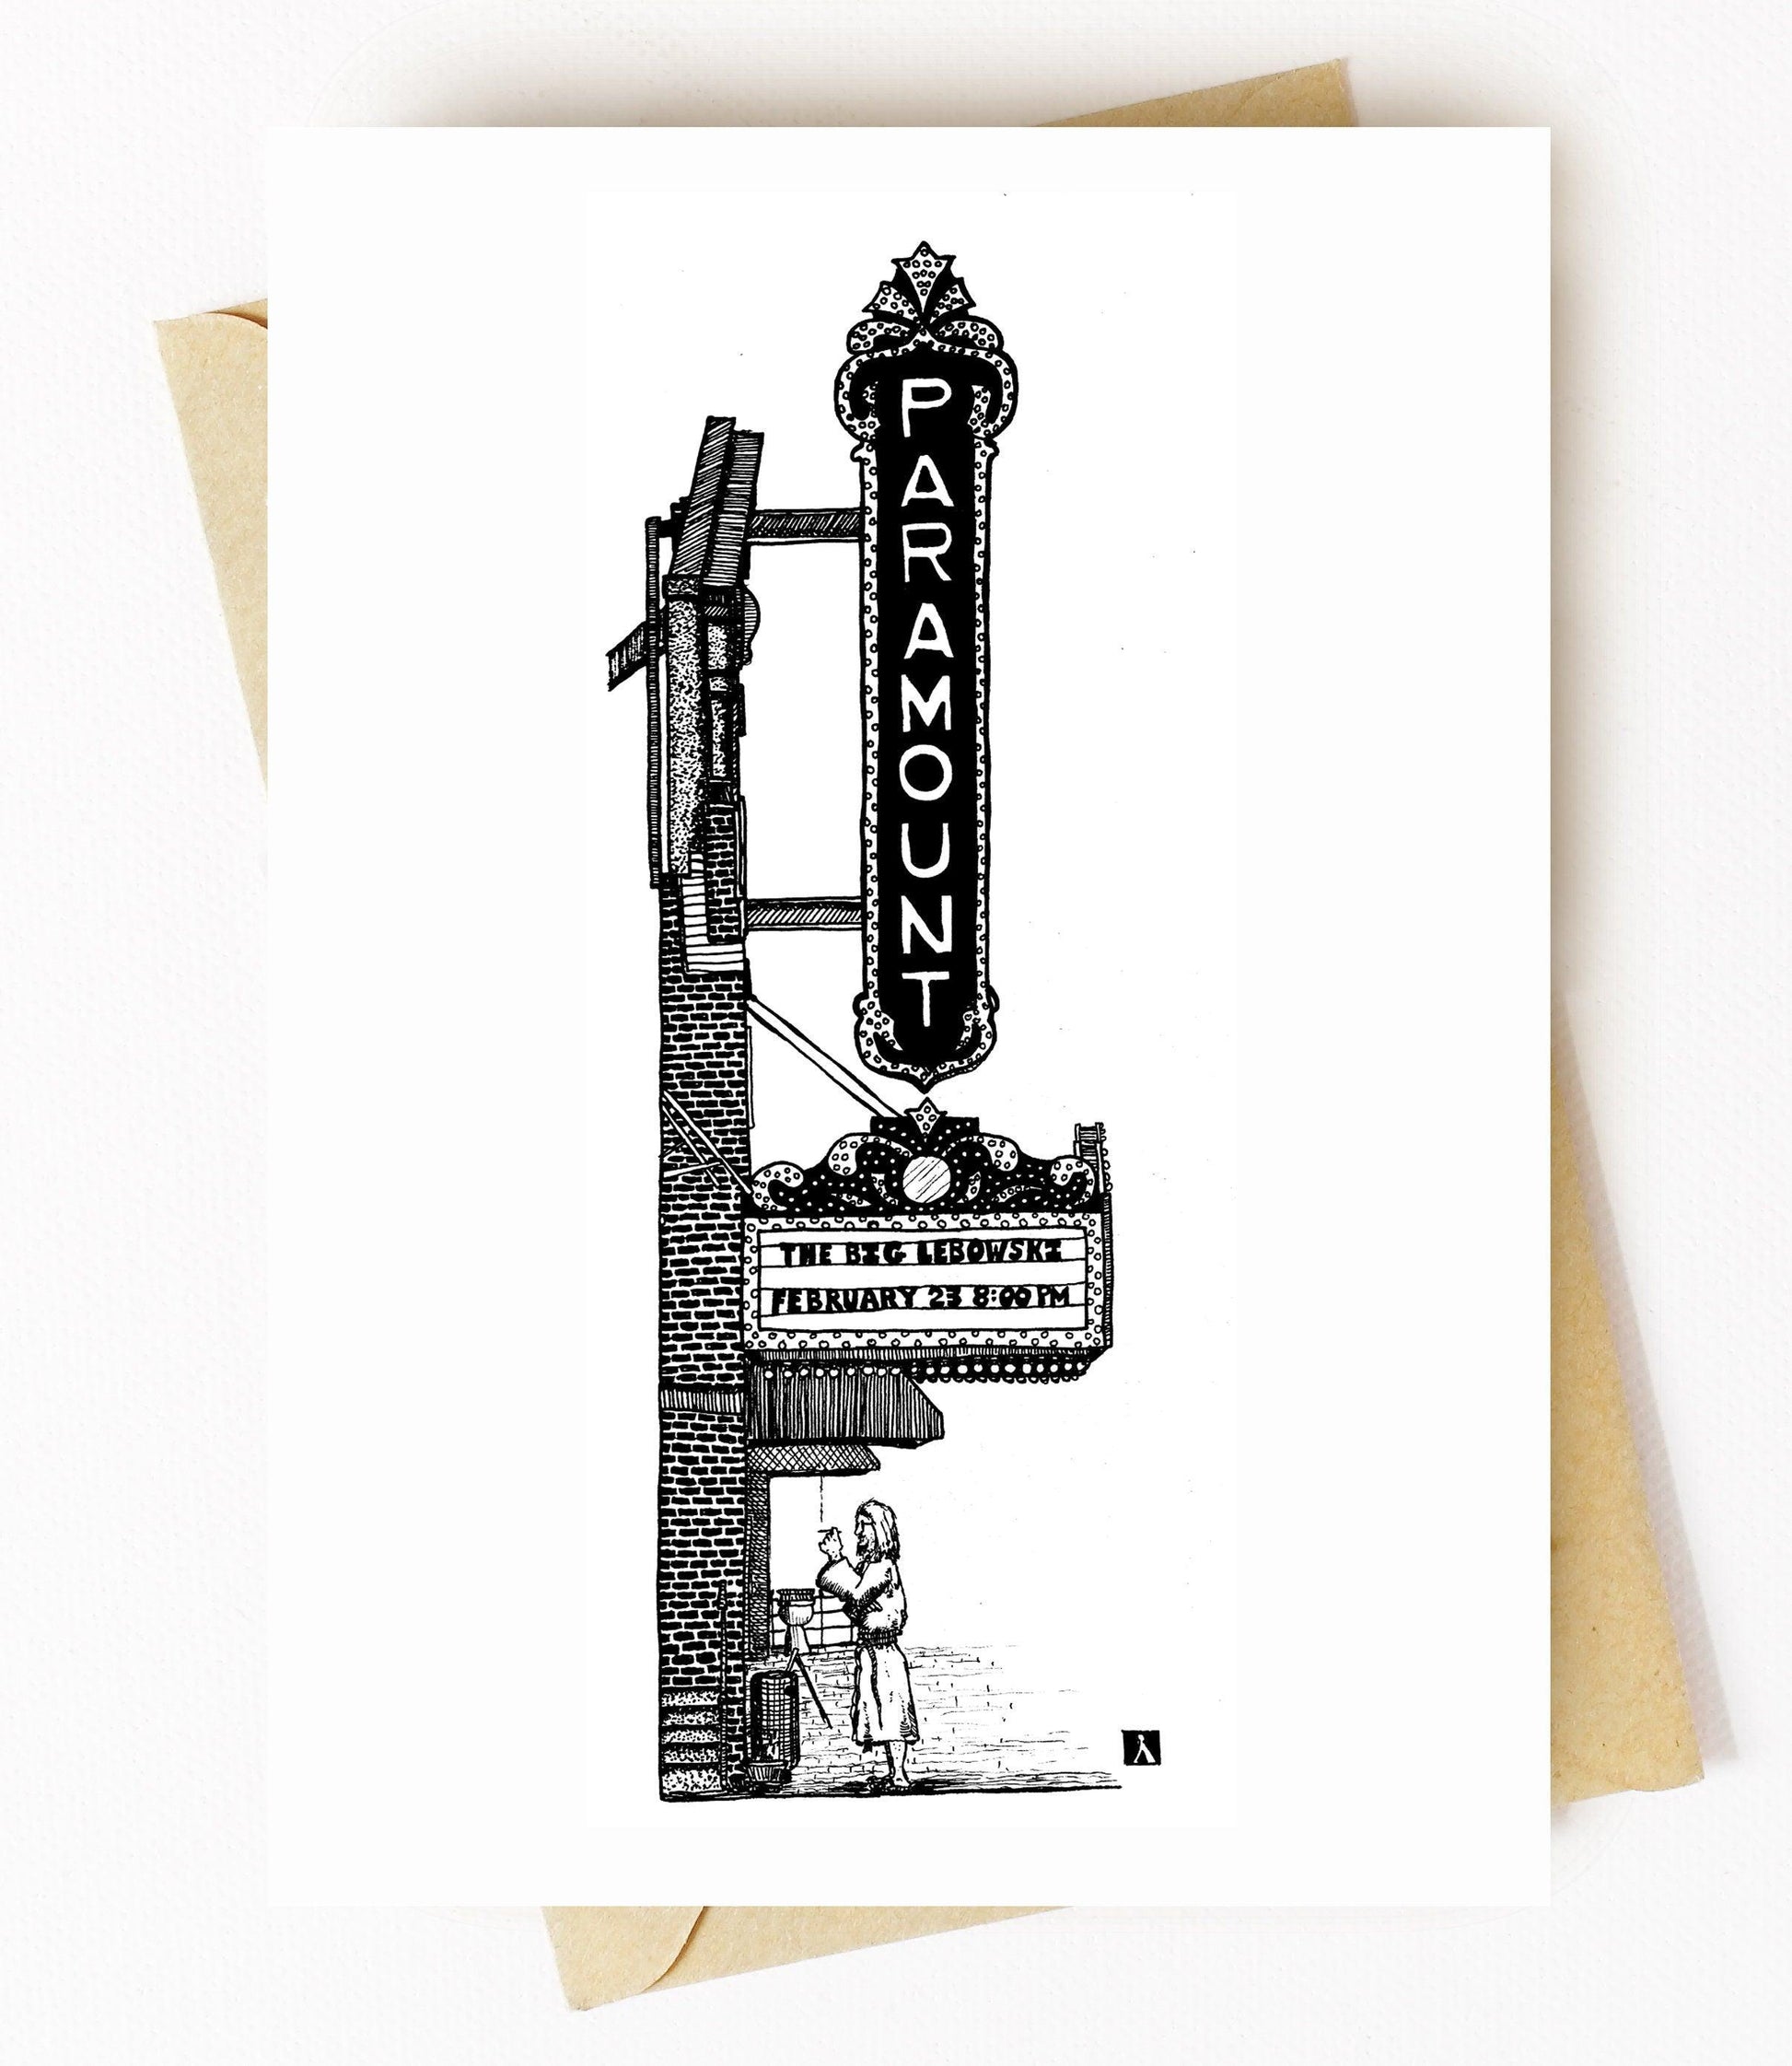 BellavanceInk: Greeting Card With A Pen & Ink Drawing Of The Paramount Theater In Charlottesville 5 x 7 Inches - BellavanceInk